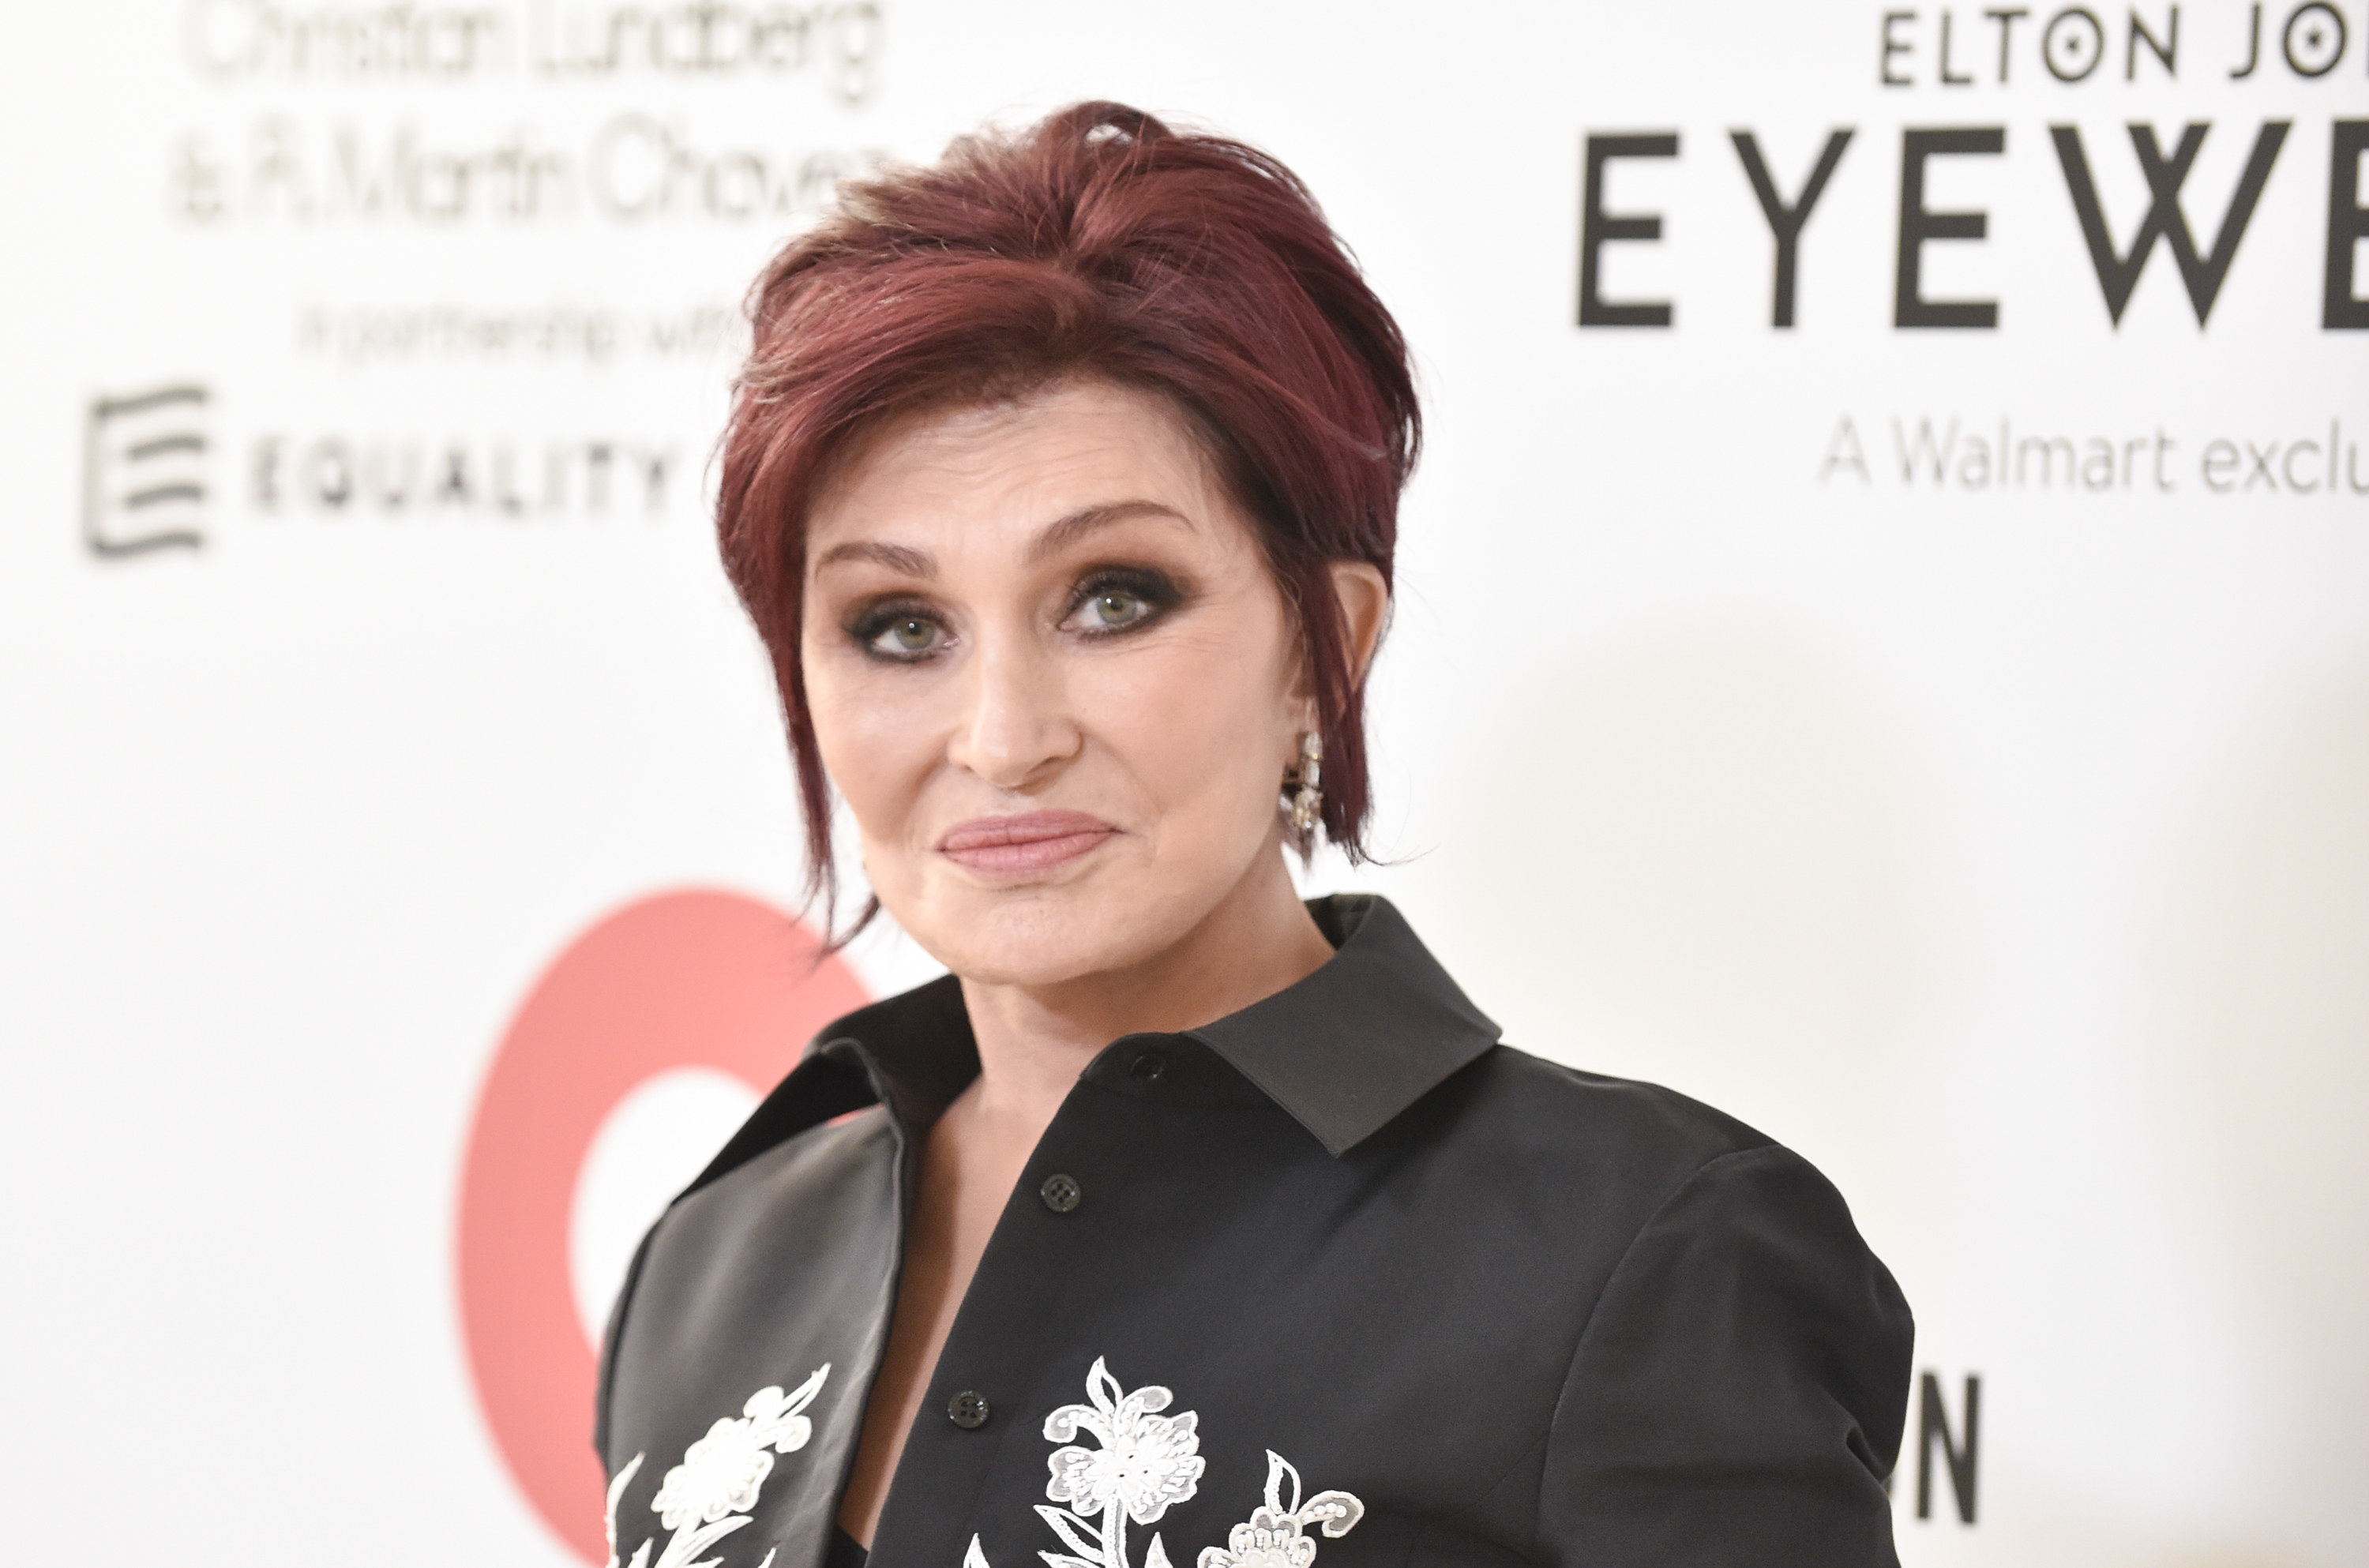 Sharon Osbourne posing at an eyewear event in a black floral button down shirt